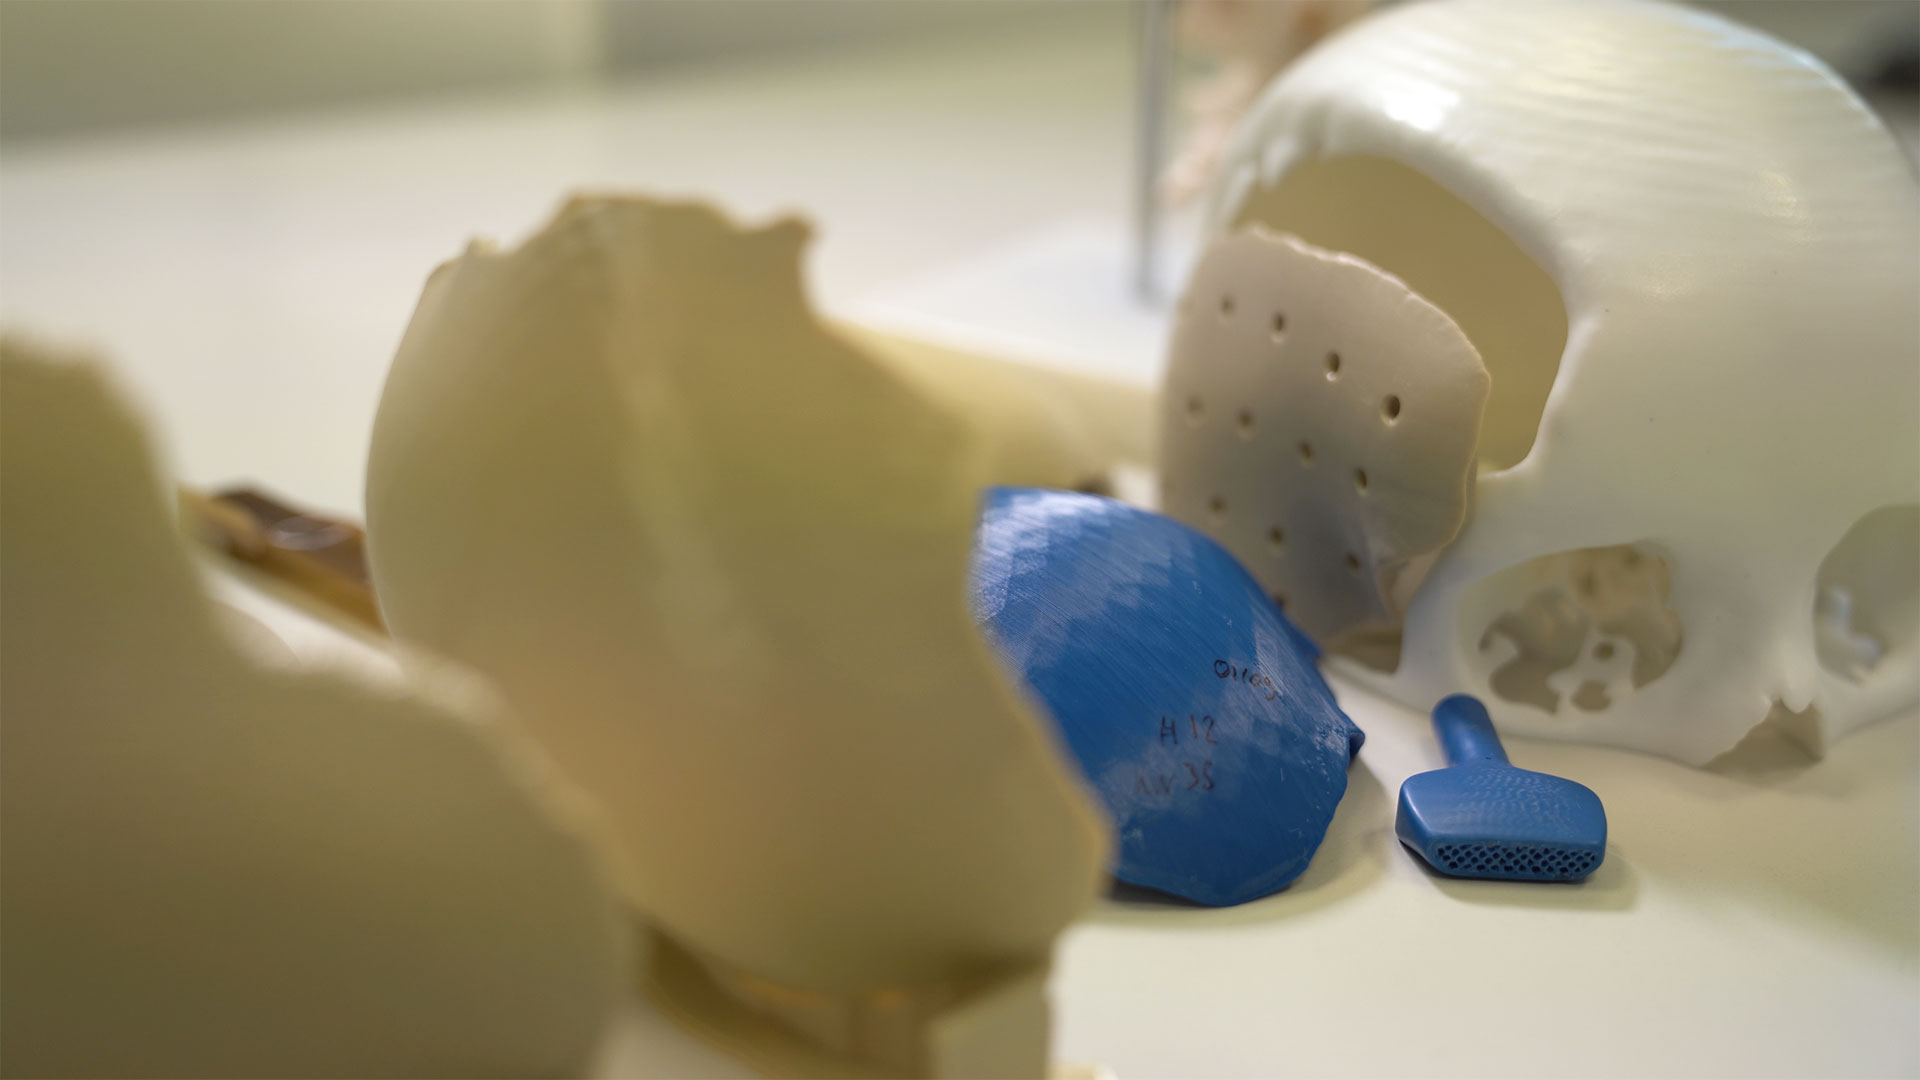 Kumovis 3D printing solutions leverage a variety of polymers and medical applications ranging from cranioplasty to spinal fusion surgery. 